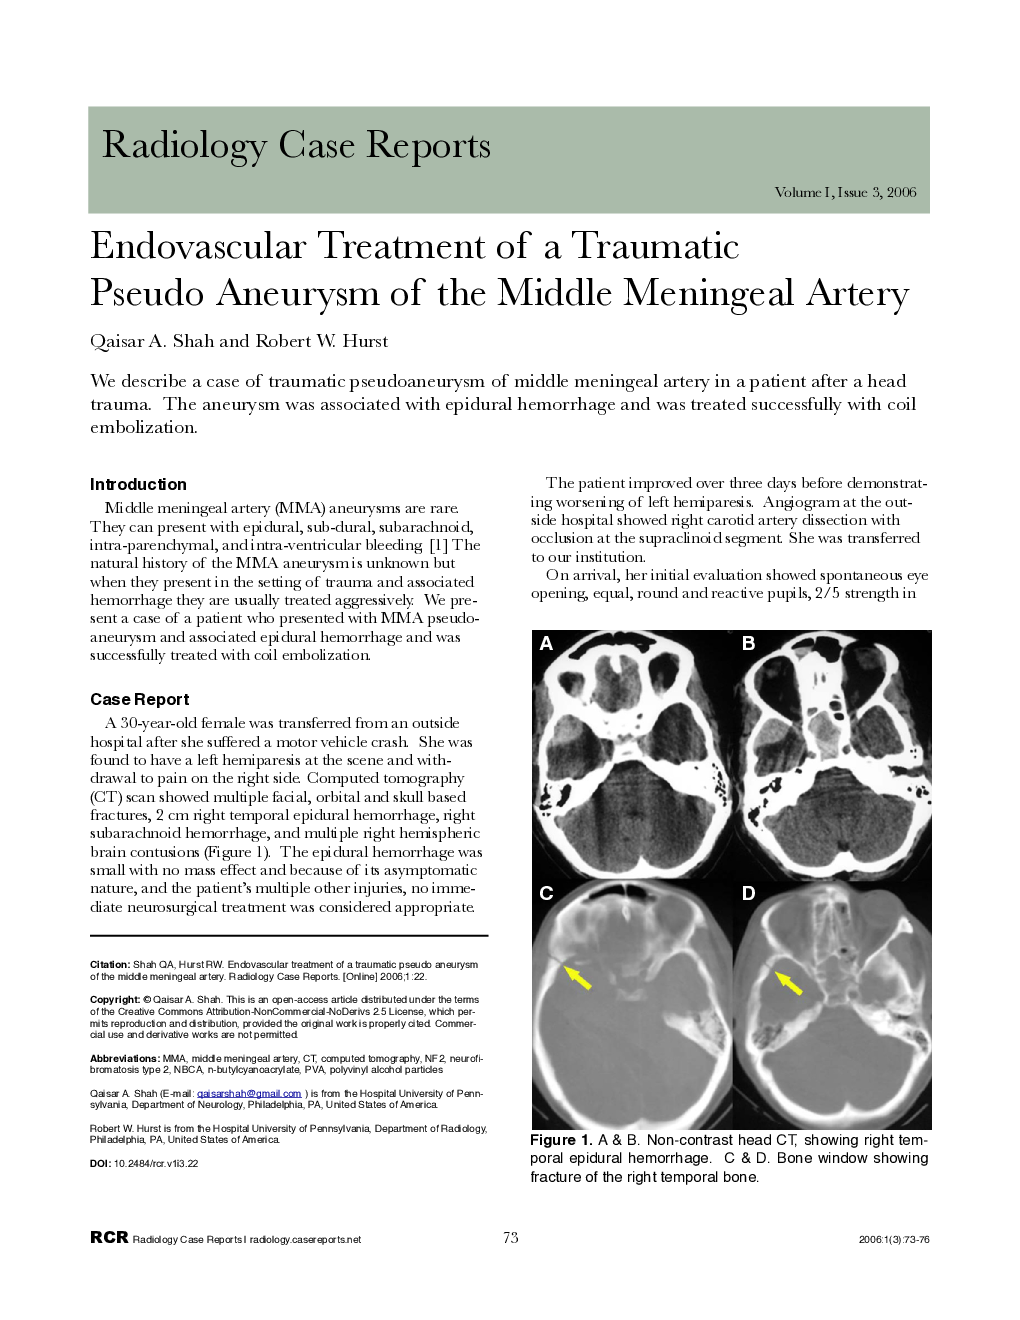 Endovascular Treatment of a Traumatic Pseudo Aneurysm of the Middle Meningeal Artery 